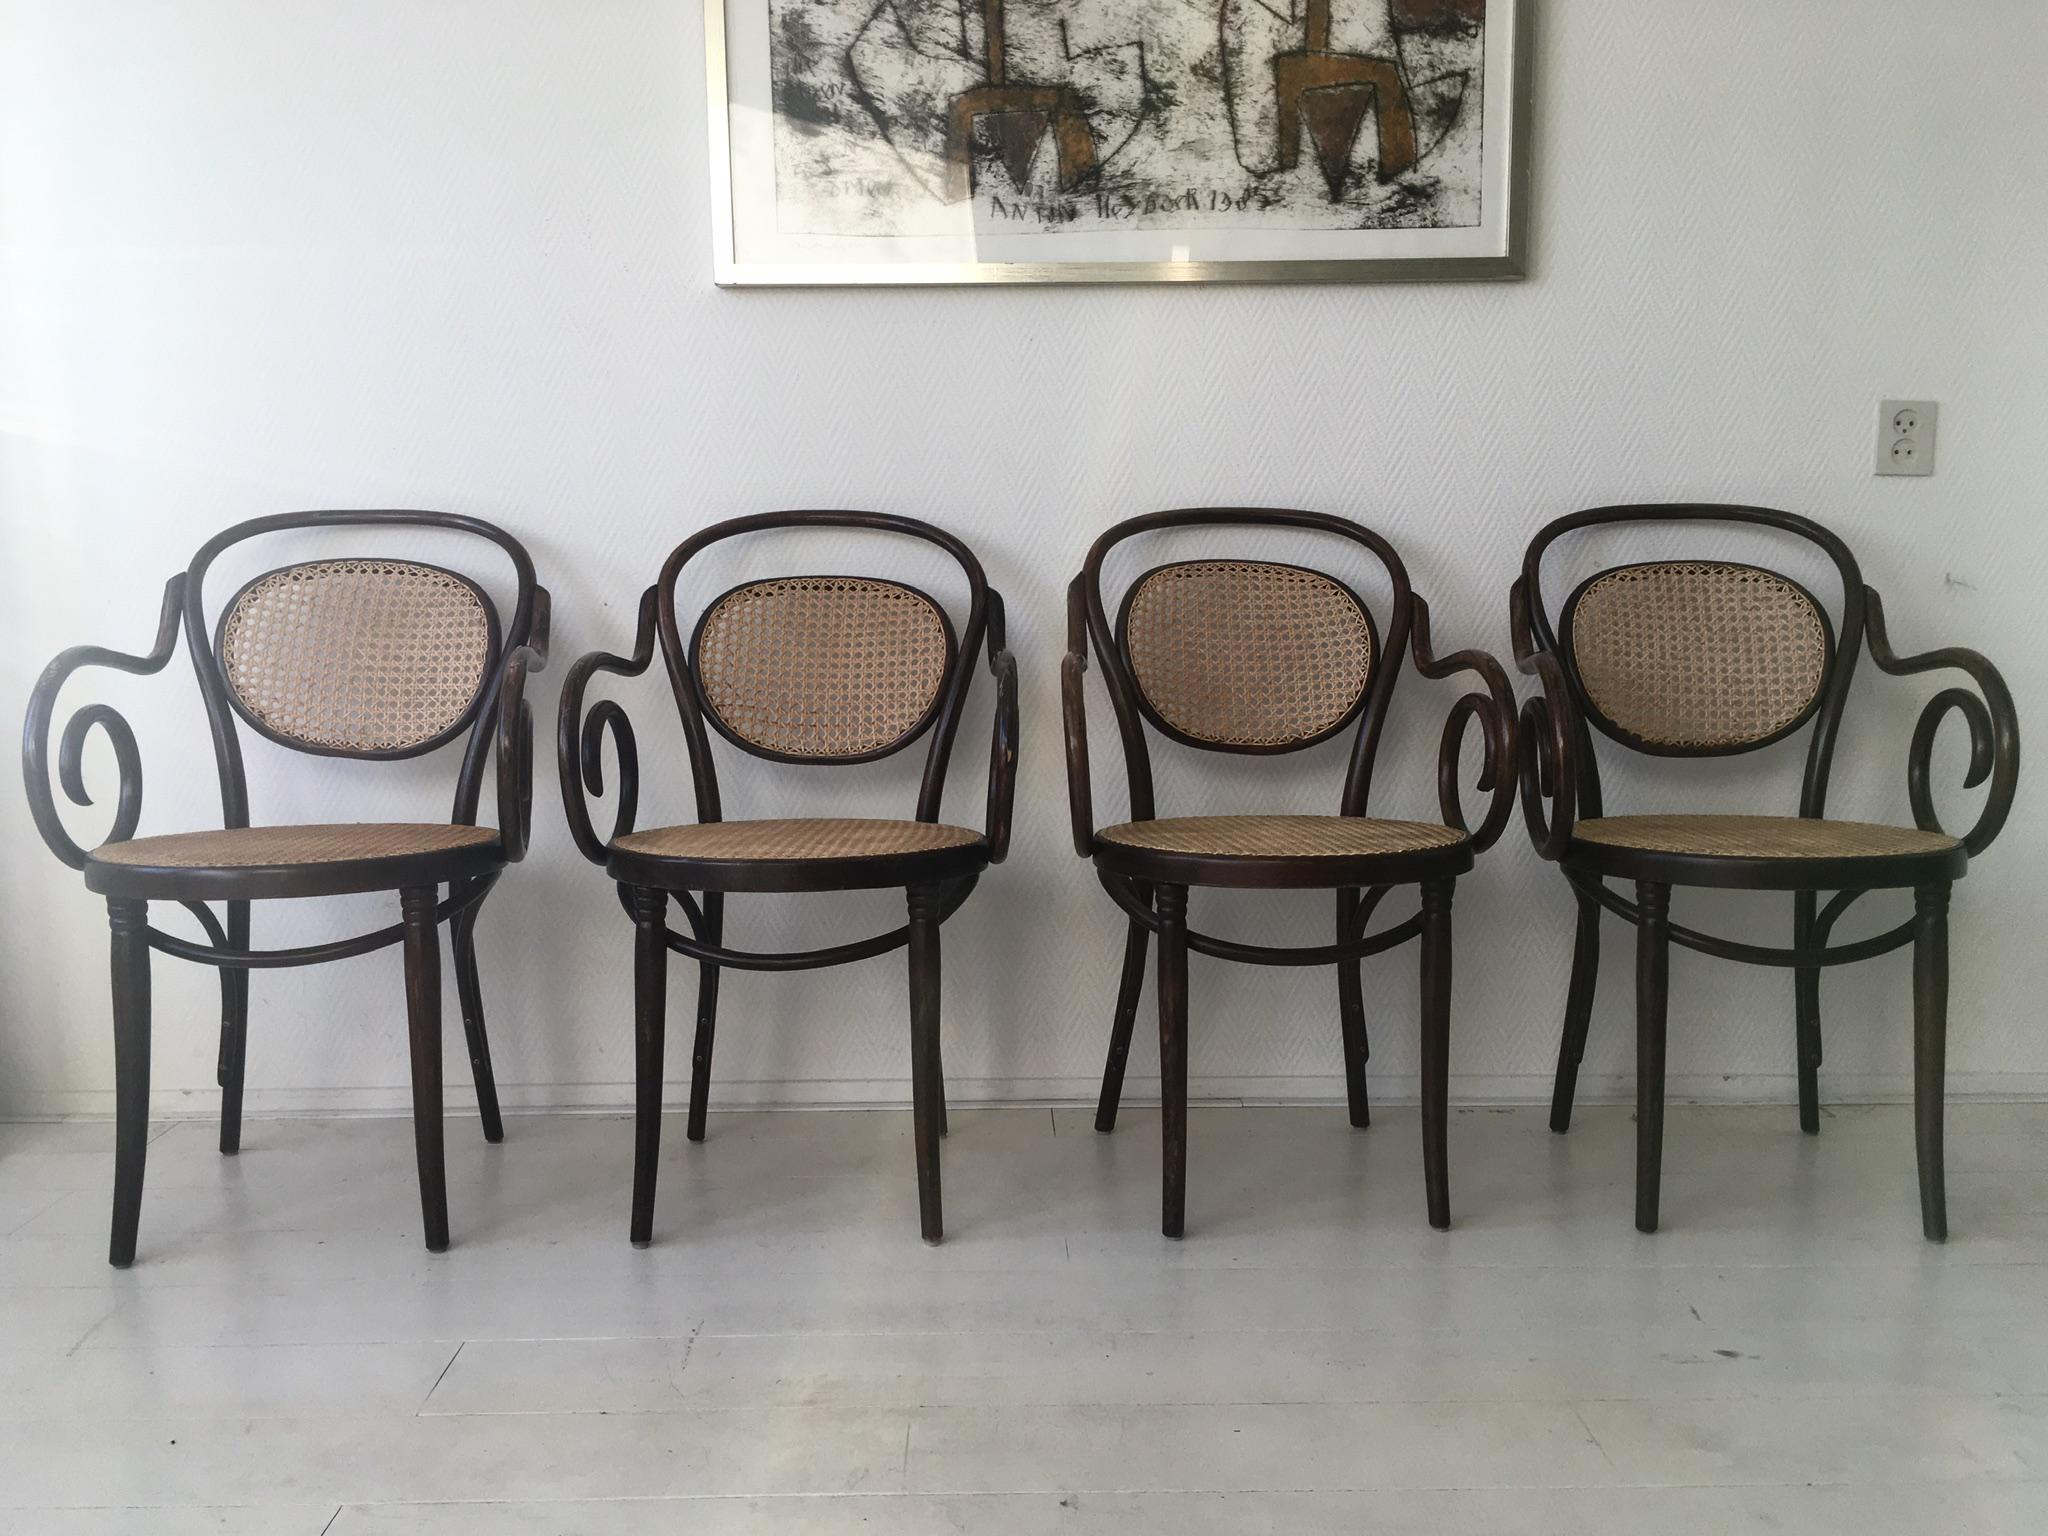 Stunning set of four bentwood and rattan chairs, which were manufactured by ZPM Radomsko (former factory of Thonet). They were manufactured in Polen with the same Thonet machines. The chairs are in Original, good condition with some wear consistent